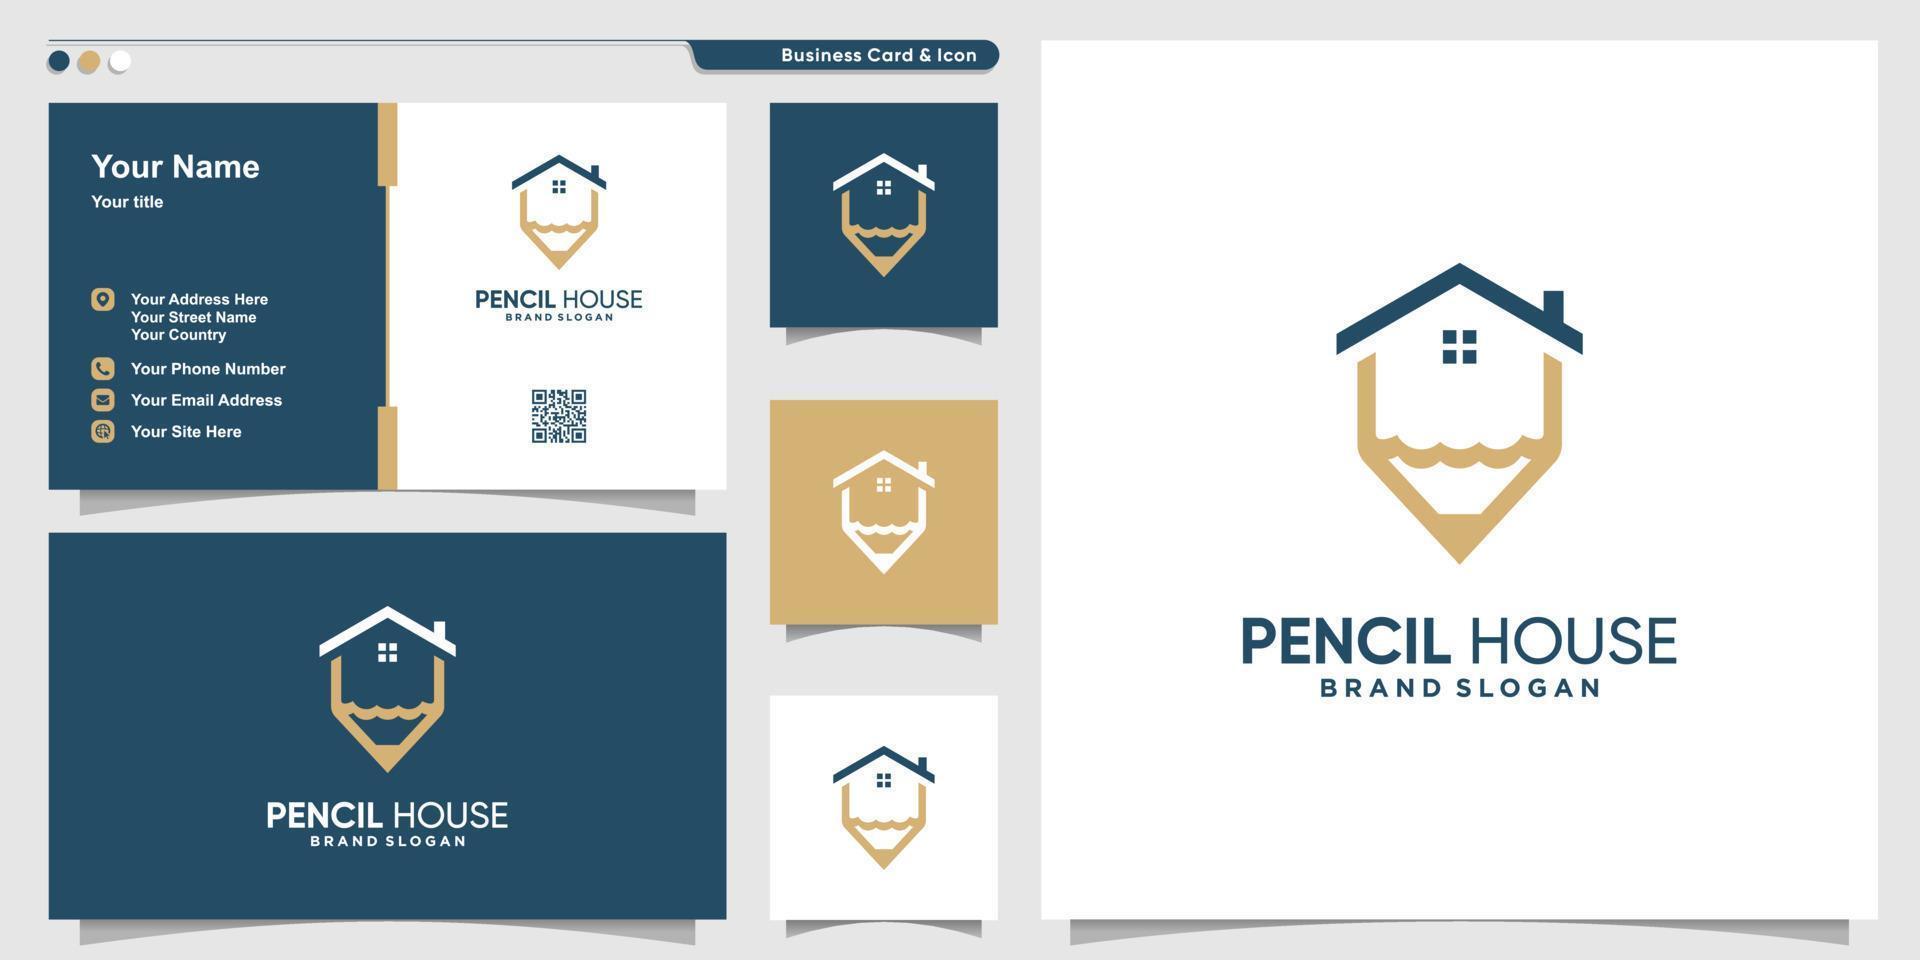 Pencil house logo template with creative concept and business card design Premium Vector